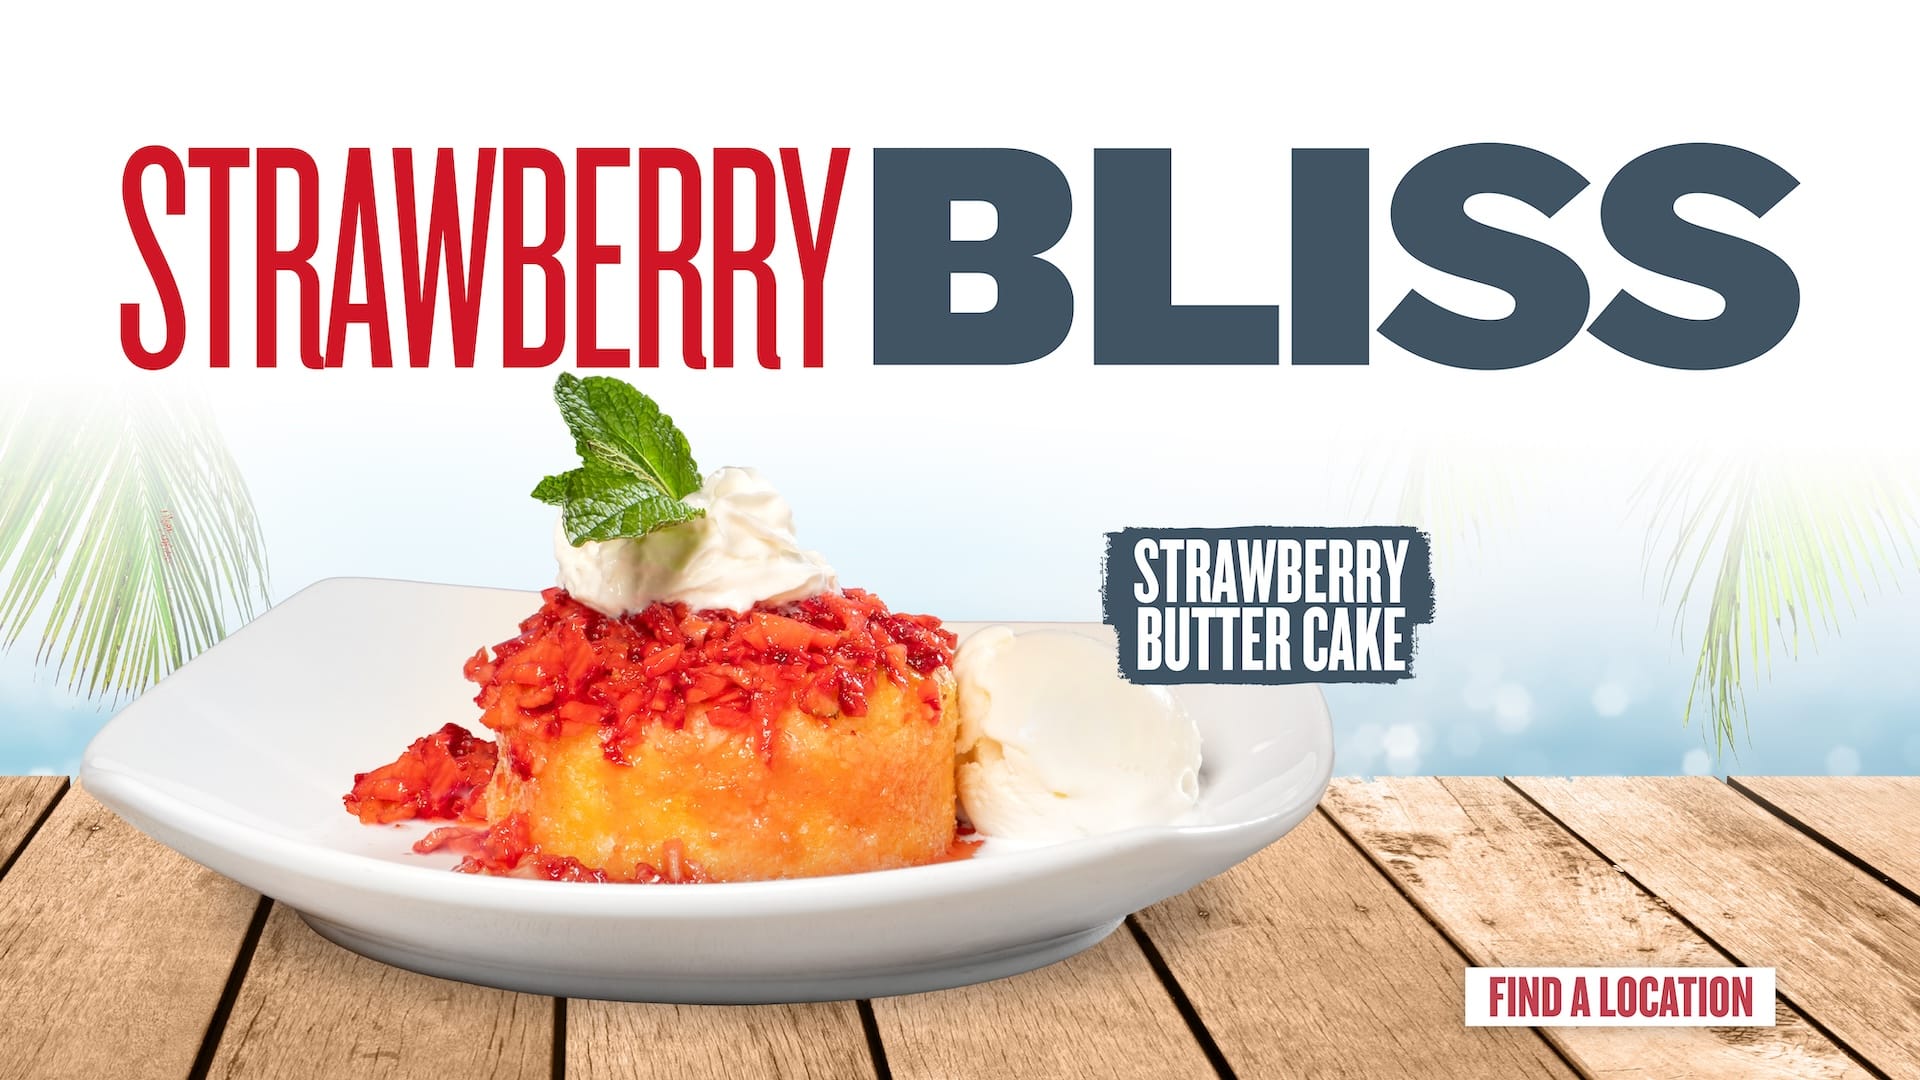 Strawberry Bliss - Strawberry Butter Cake - Find a location